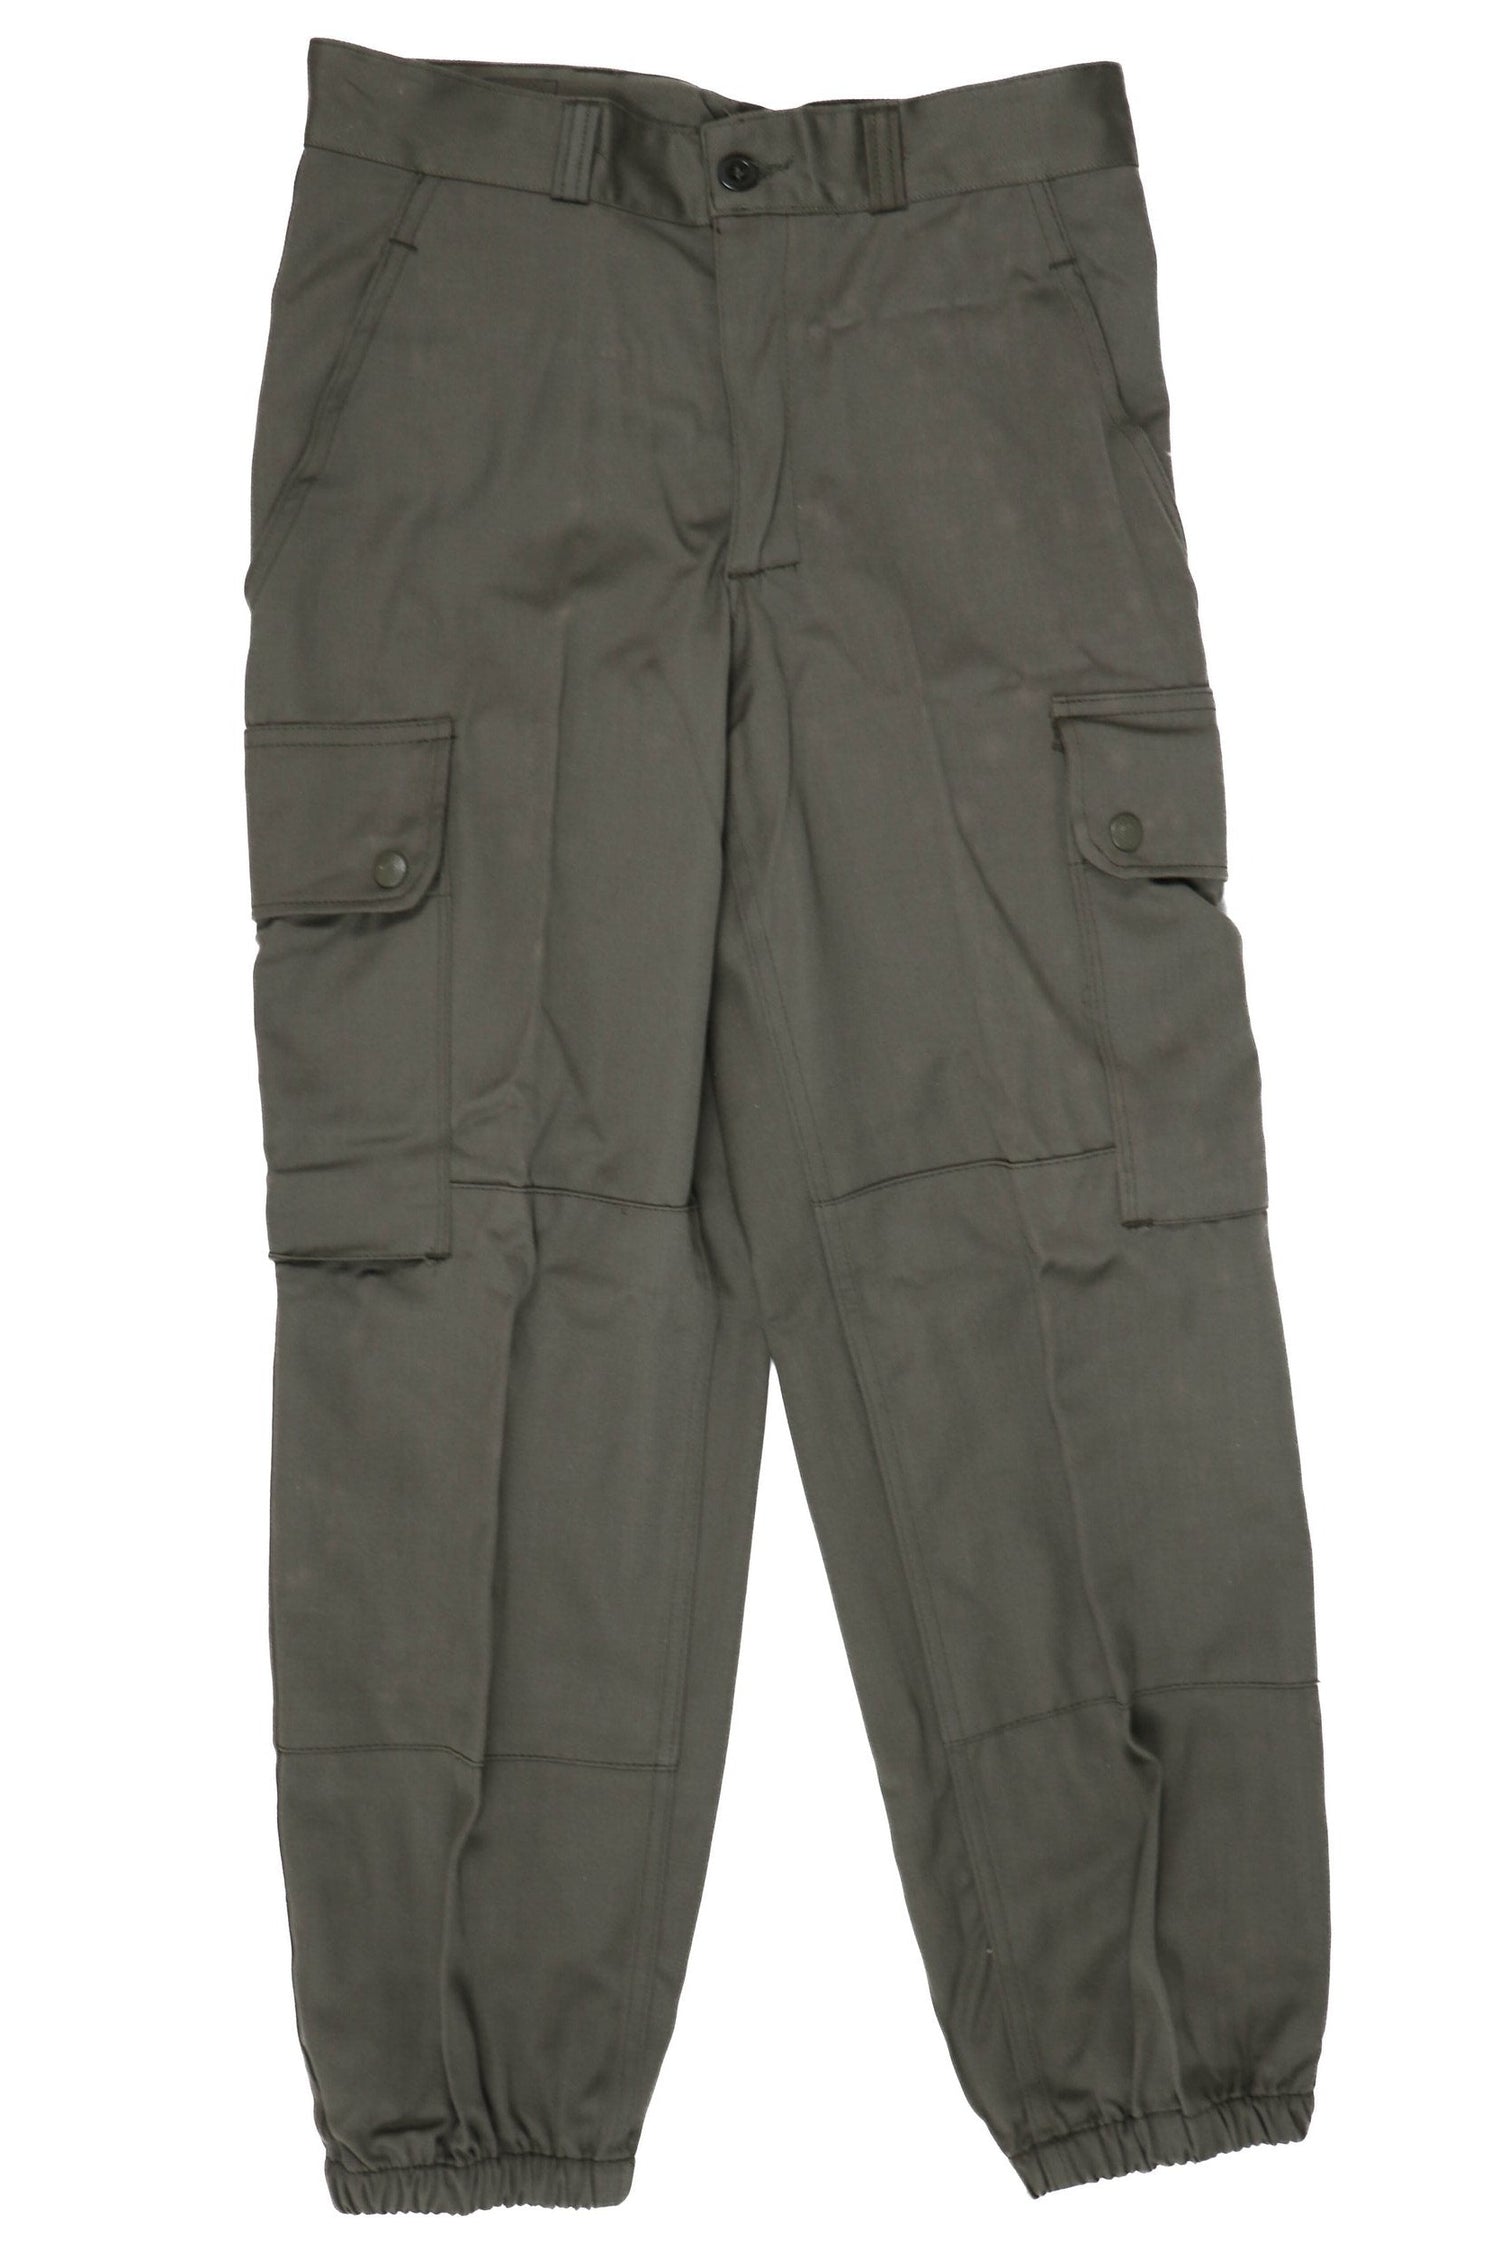 French F2 Field Pants